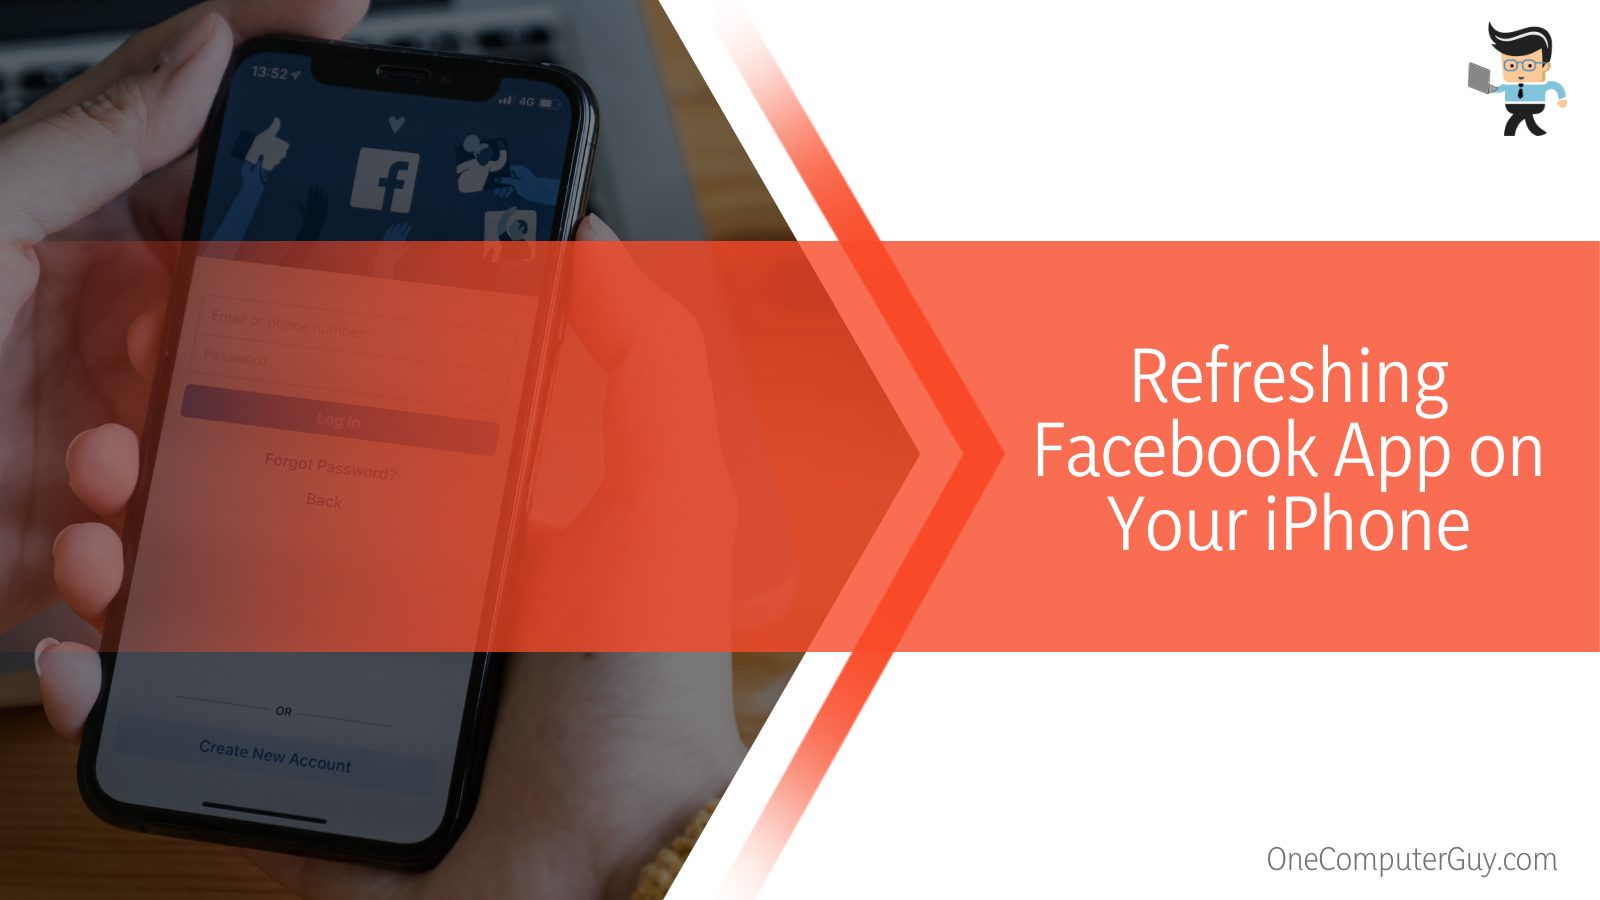 Refreshing Facebook App on Your iPhone